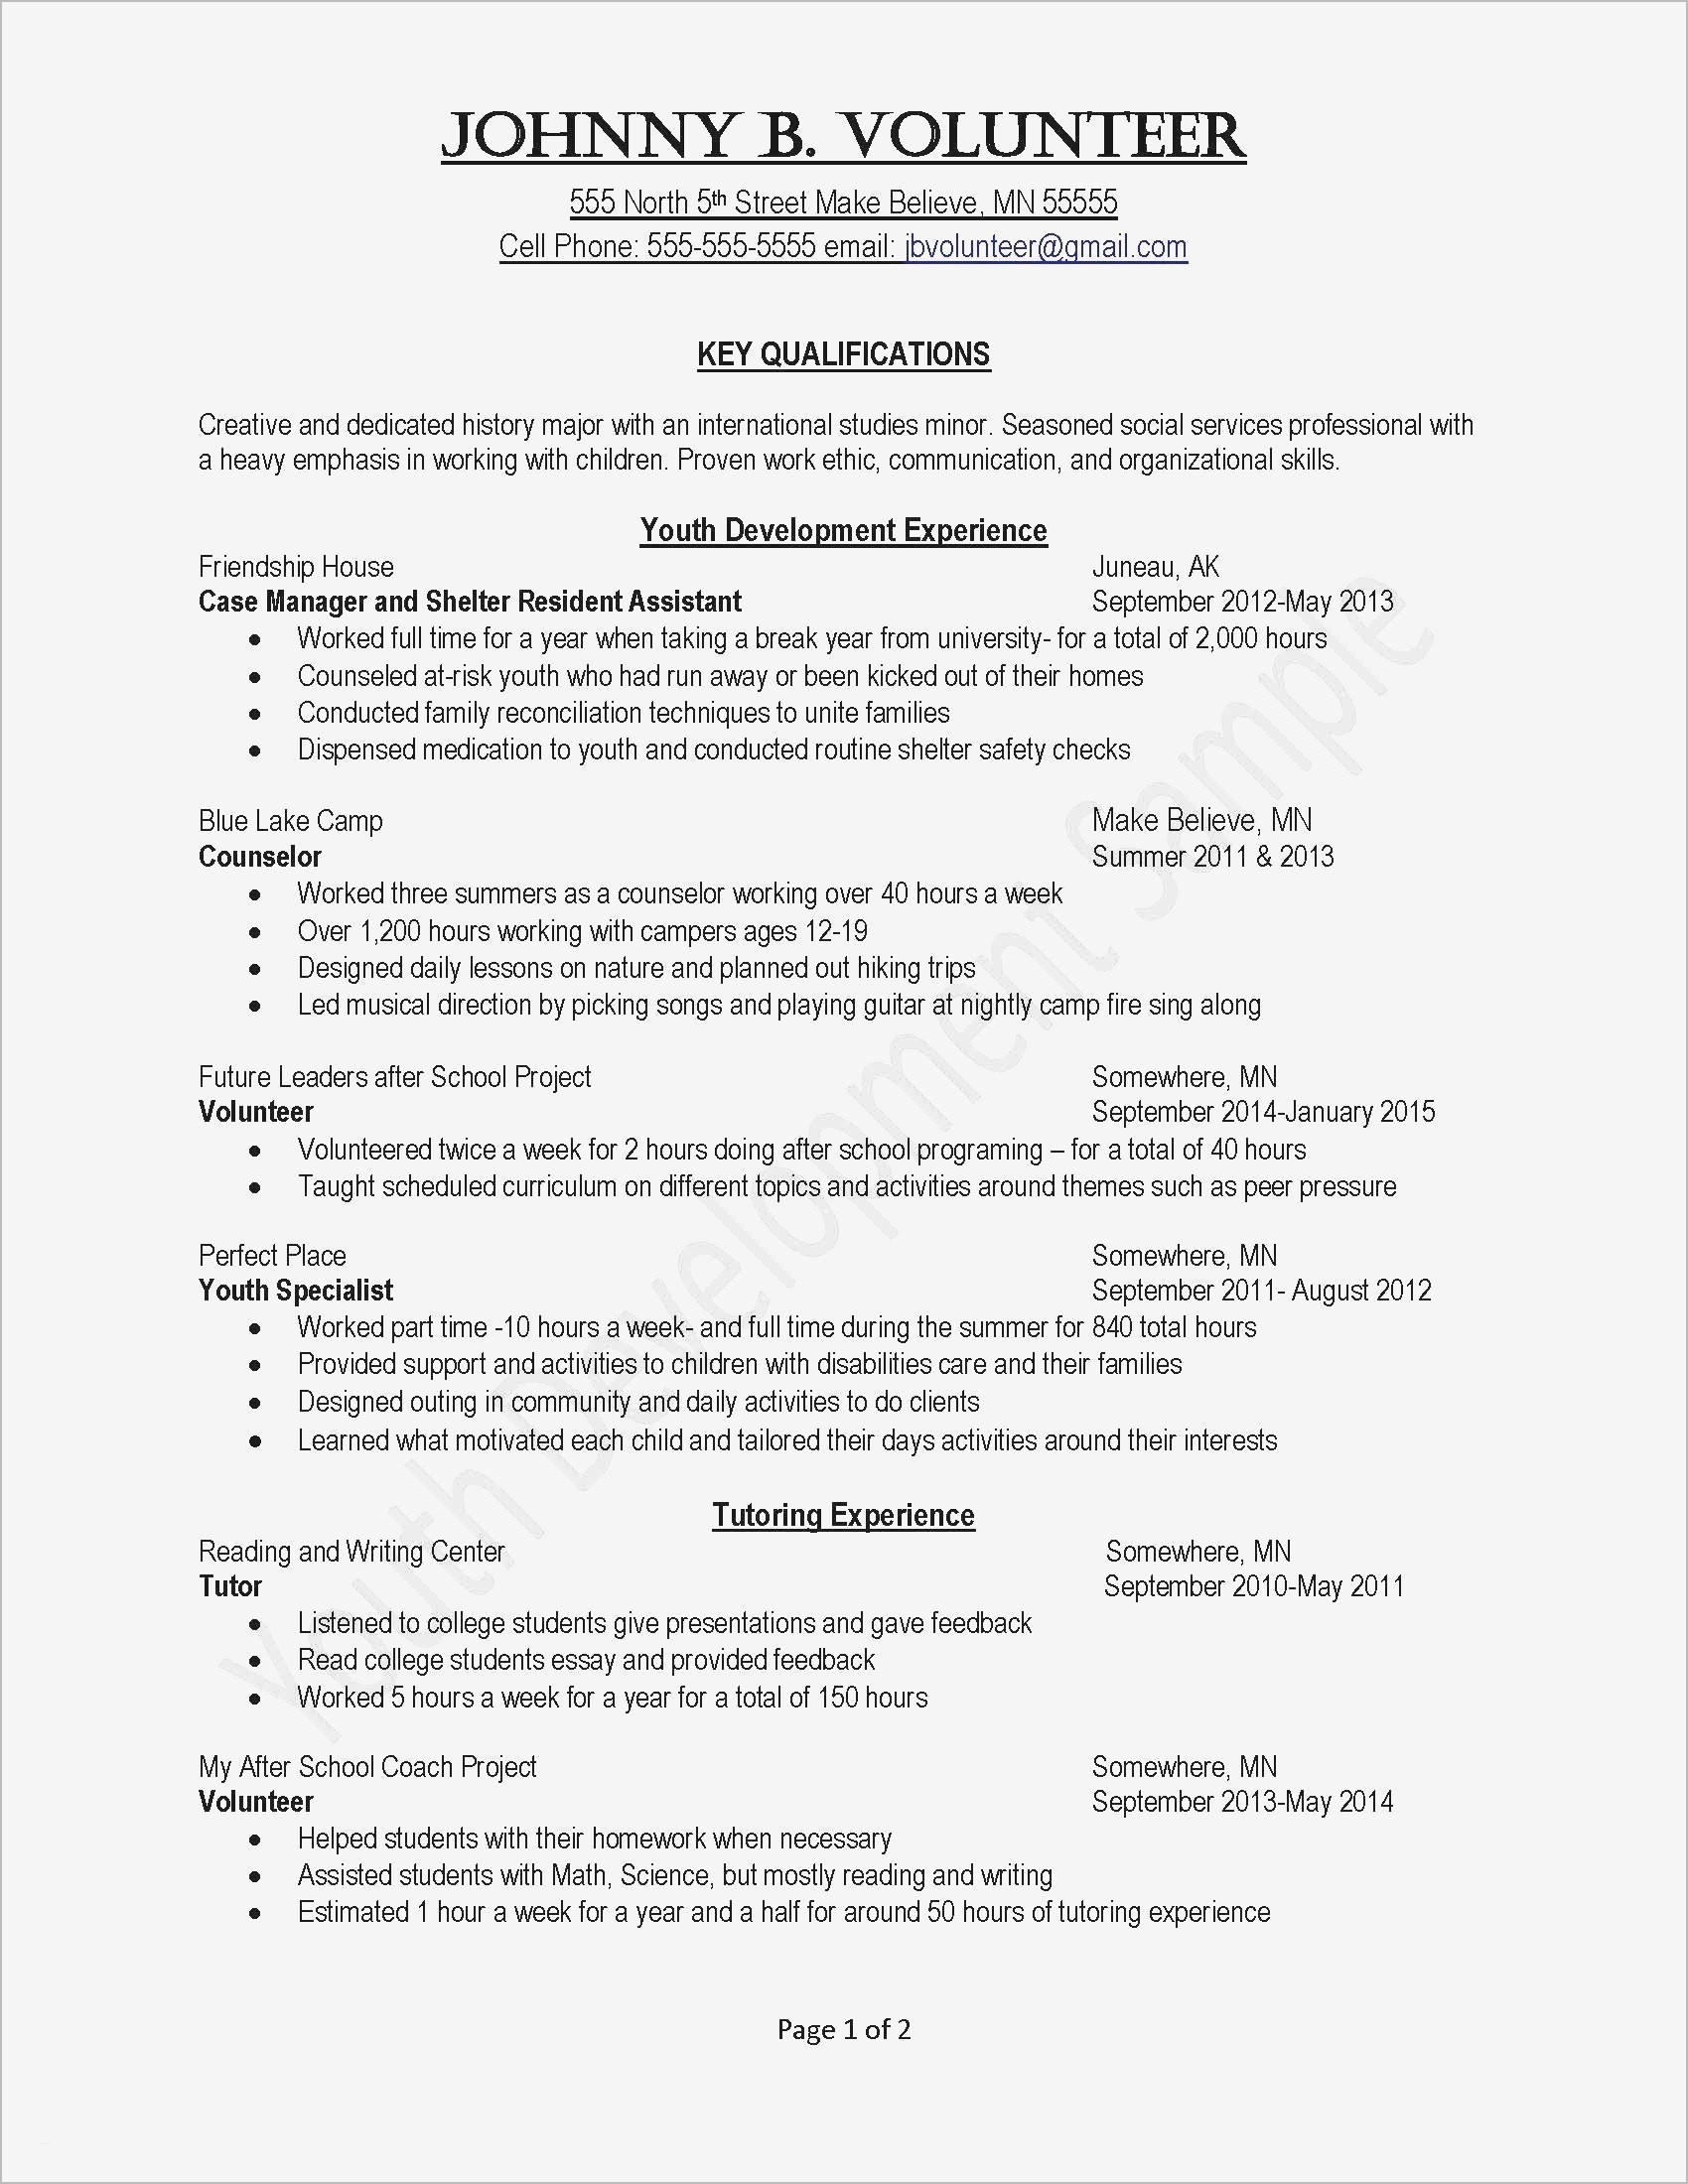 Work Experience Resume How To Make A Resume Without College Experience Resume Sample Job Experience Valid Cfo Resume Template Inspirational Of How To Make A Resume Without College Experience work experience resume|wikiresume.com